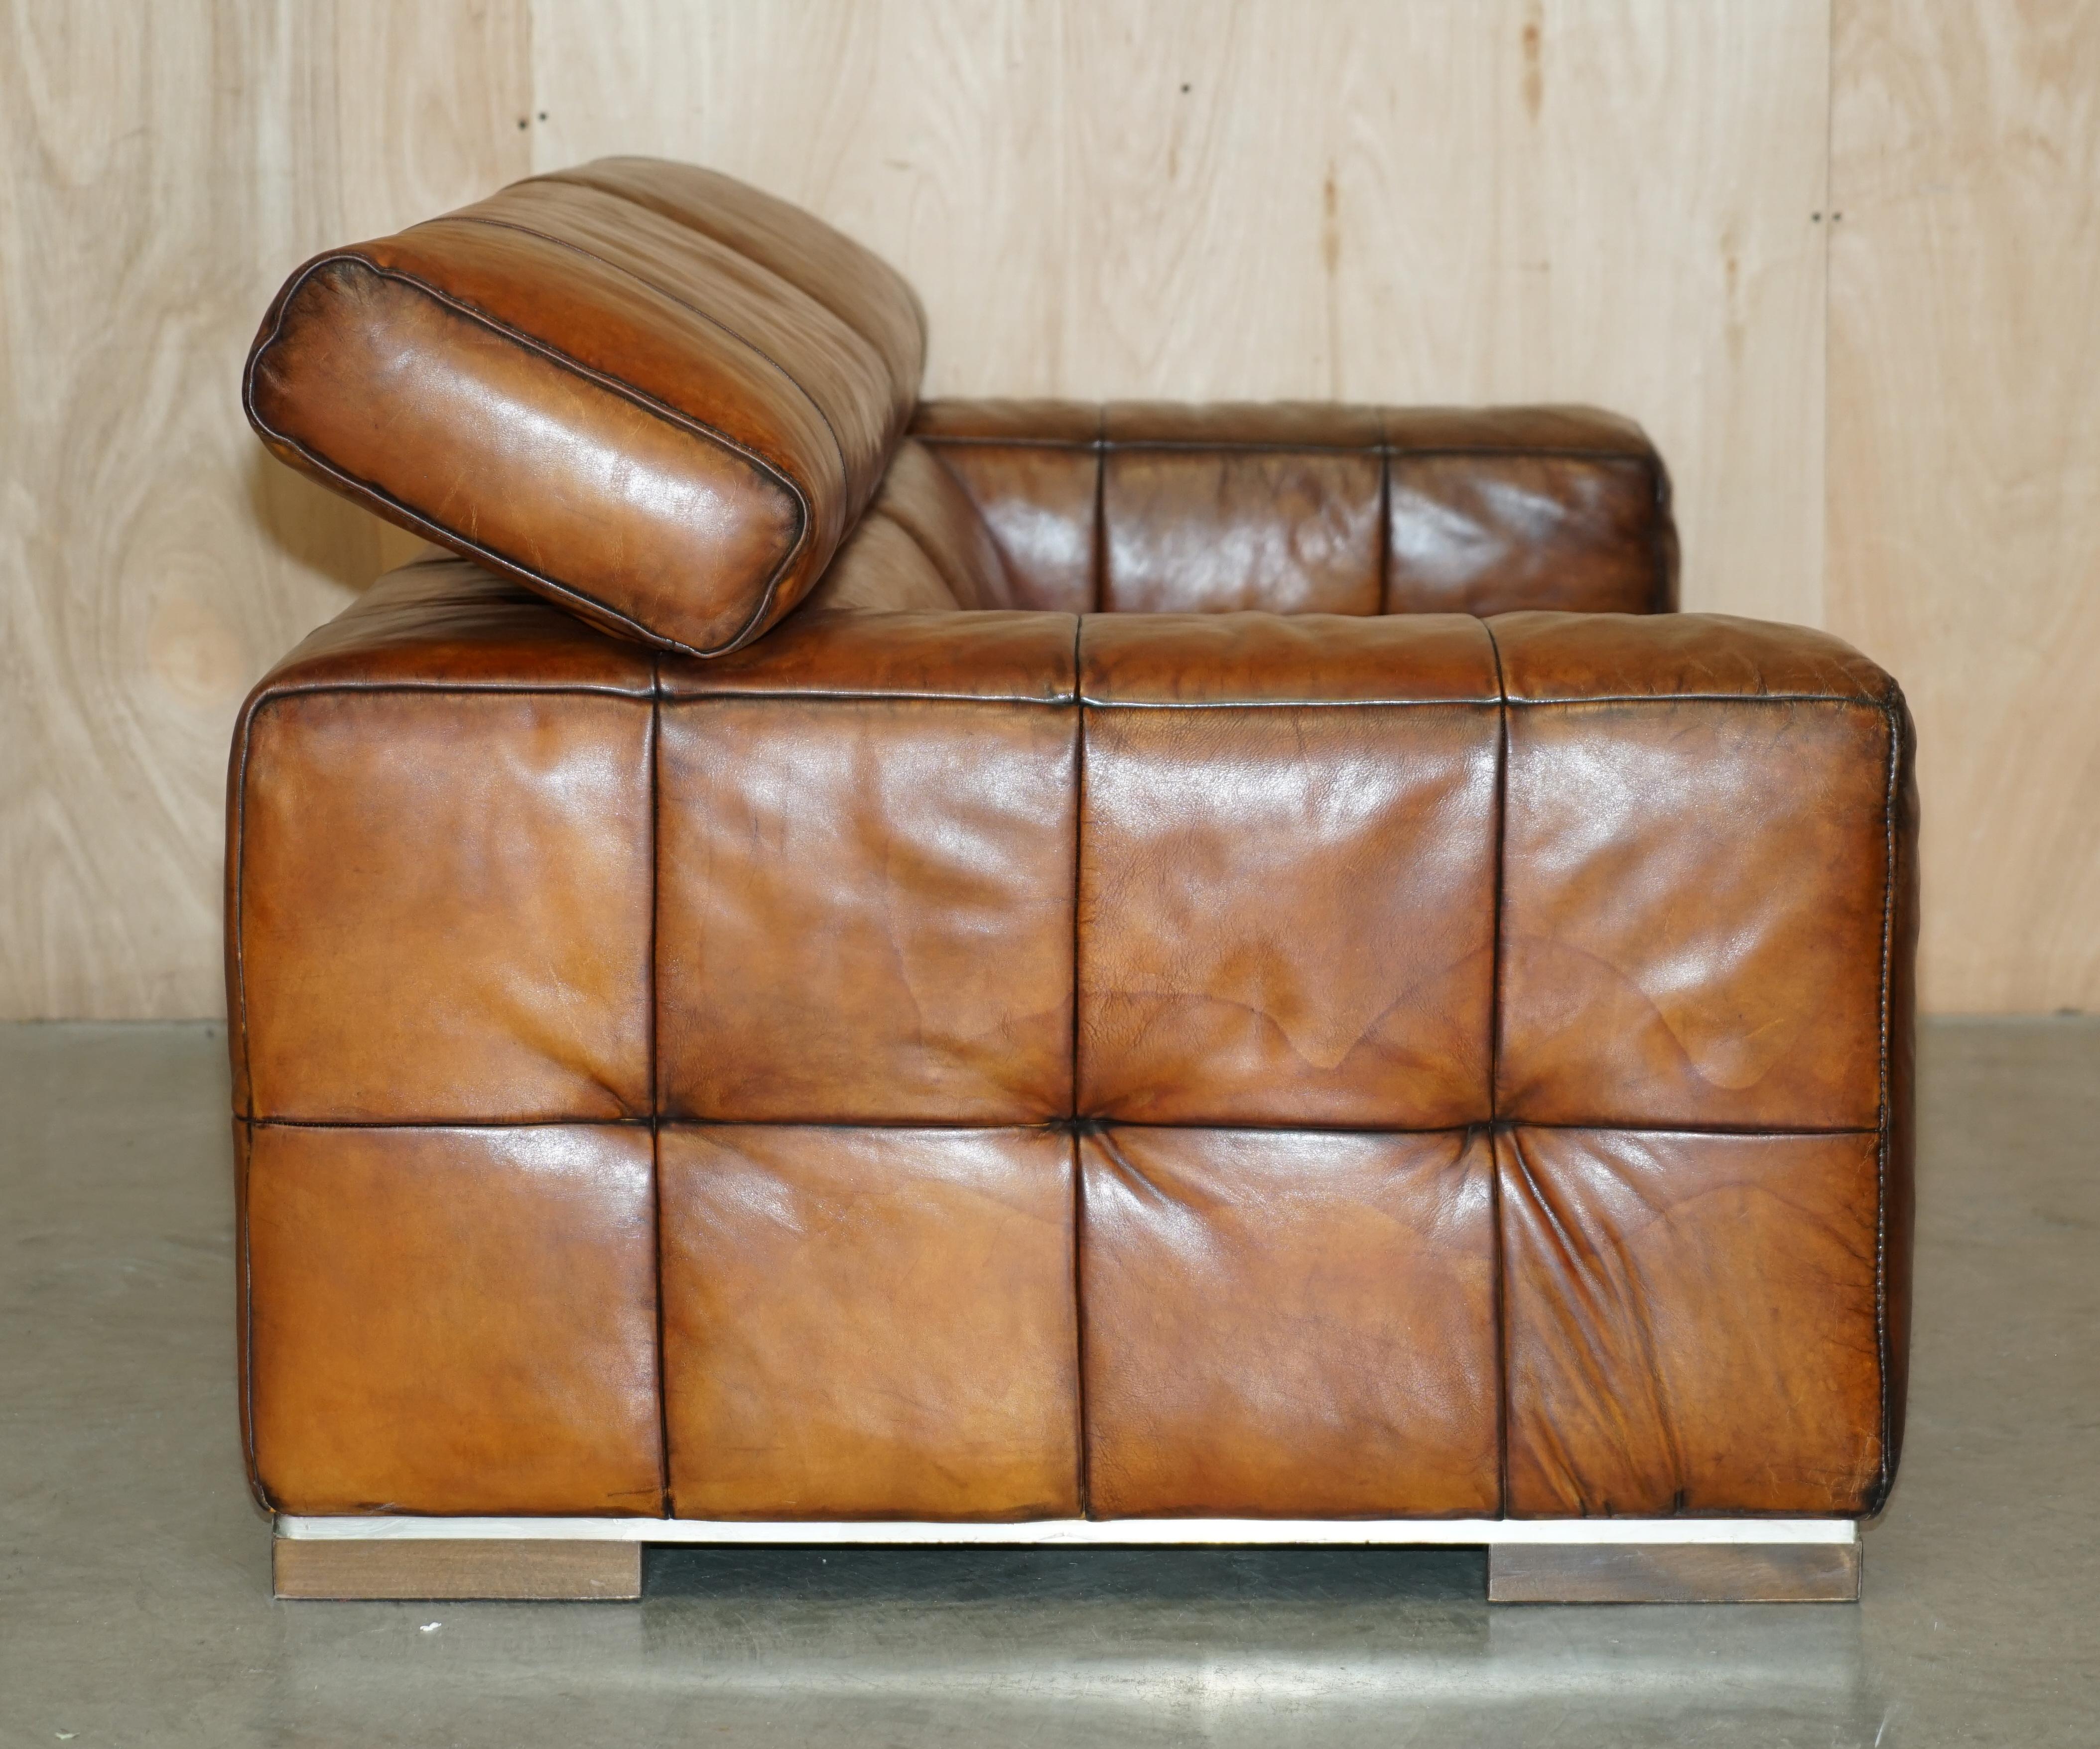 Natuzzi Roma Hand Dyed Cigar Brown Leather Sofa Raising Headrest Part of a Suite For Sale 7